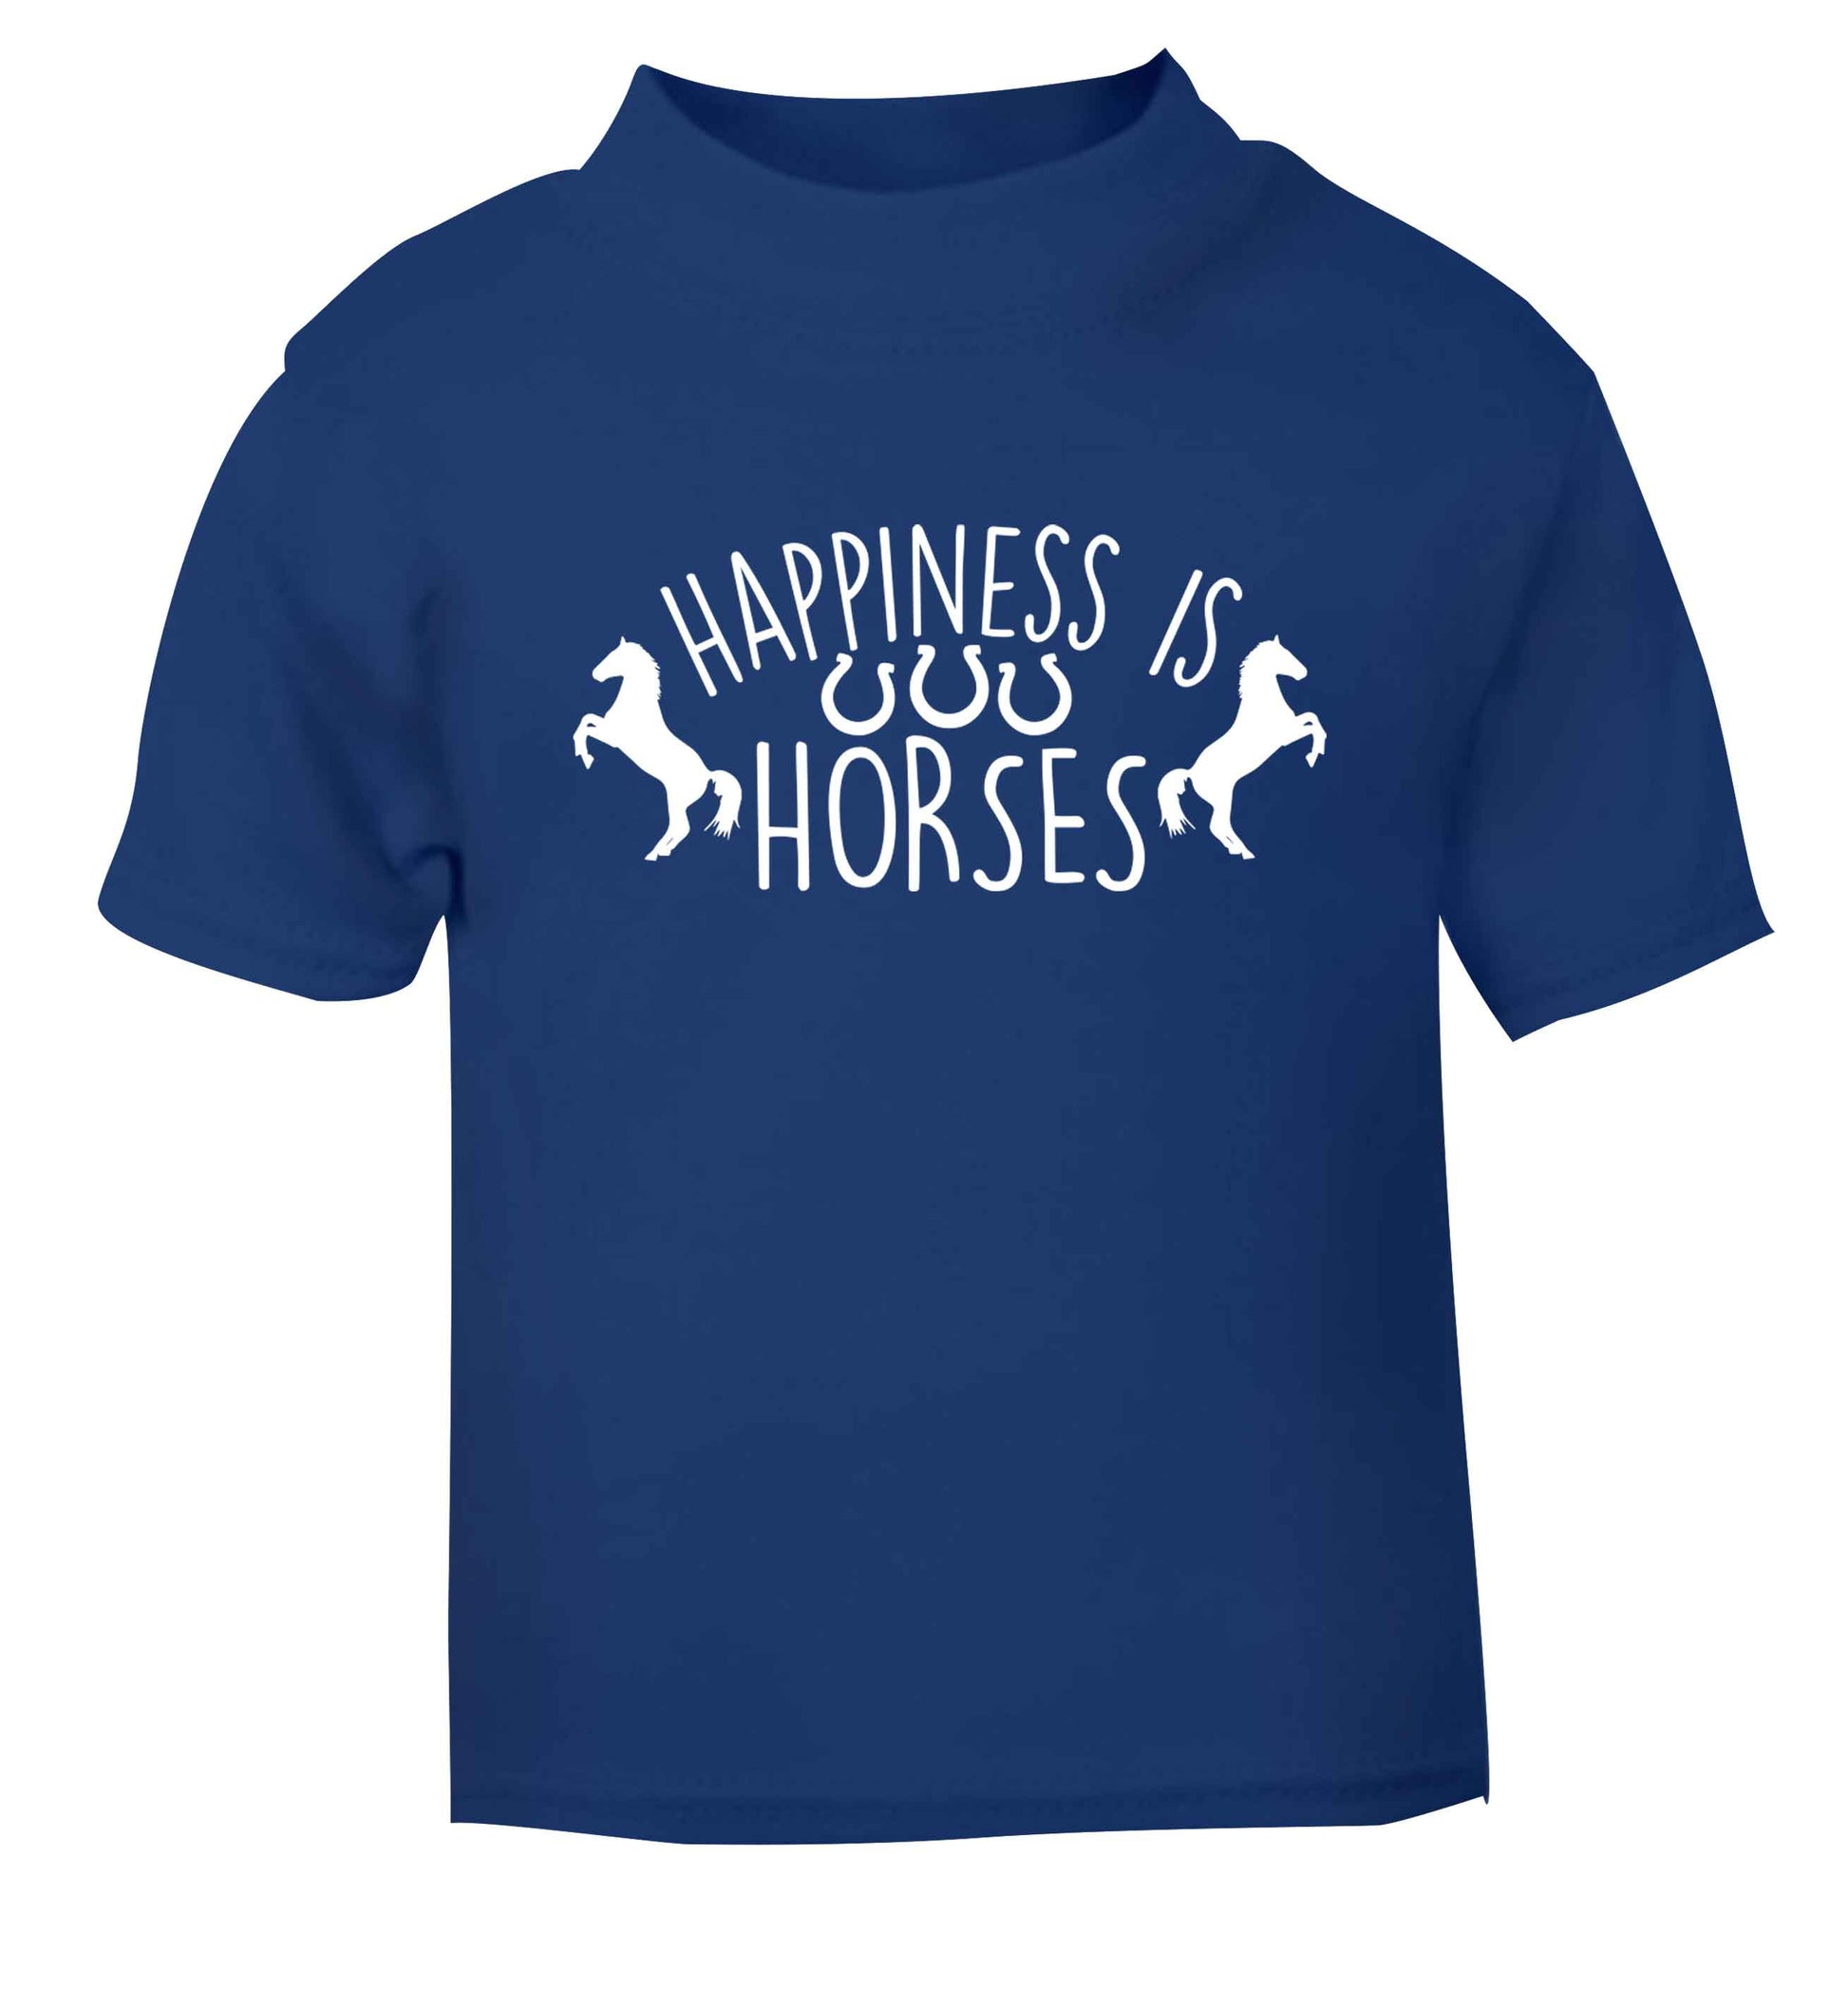 Happiness is horses blue baby toddler Tshirt 2 Years